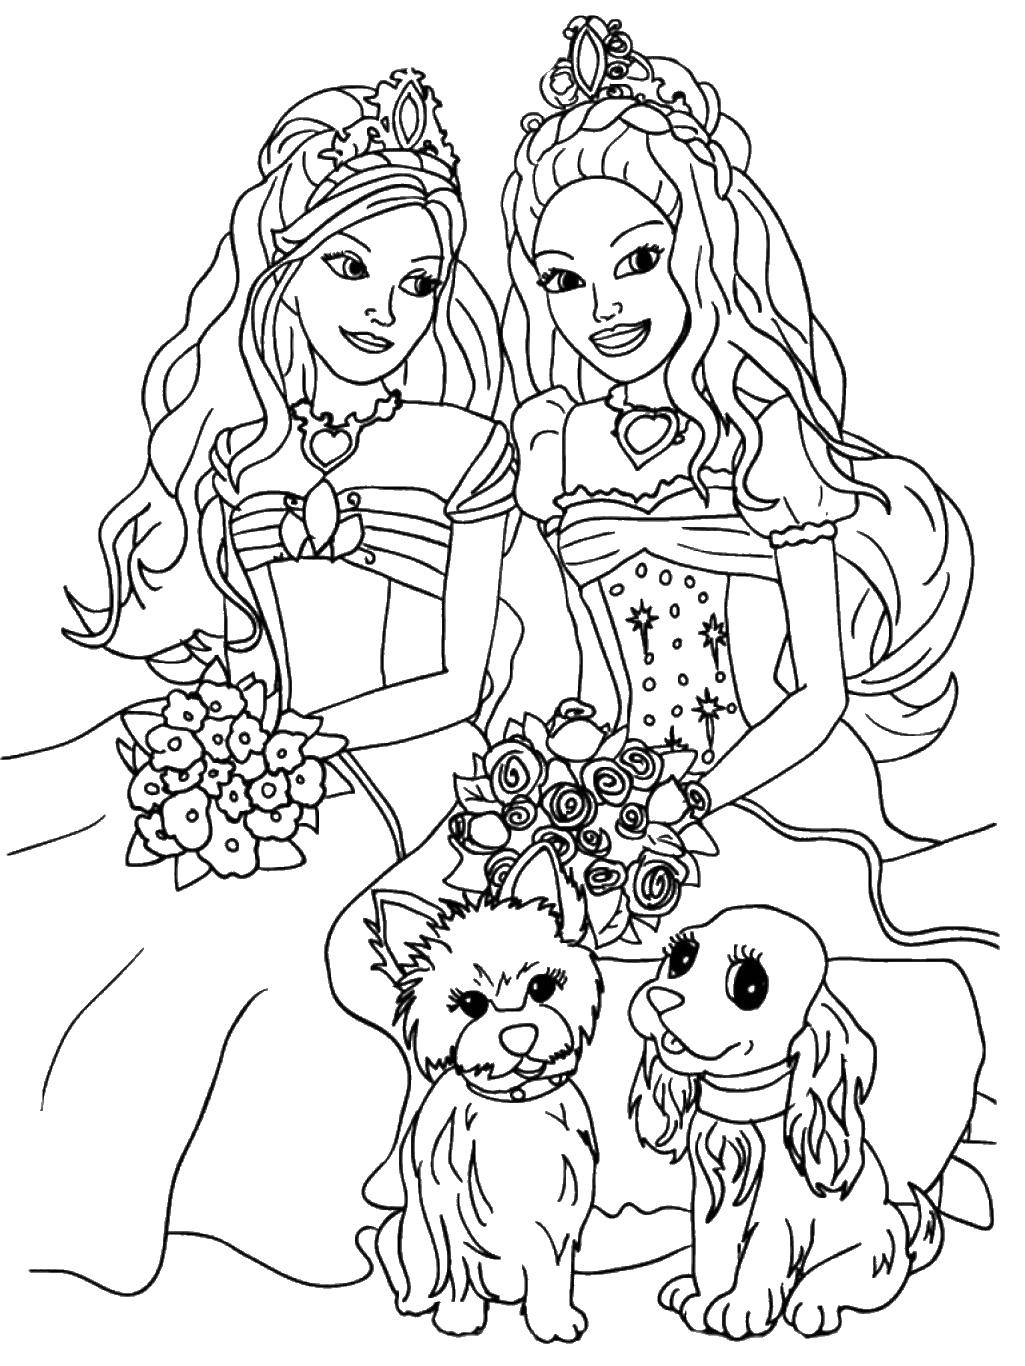 Coloring Barbie and dogs. Category For girls. Tags:  Barbie , crowns, bouquets, dogs.